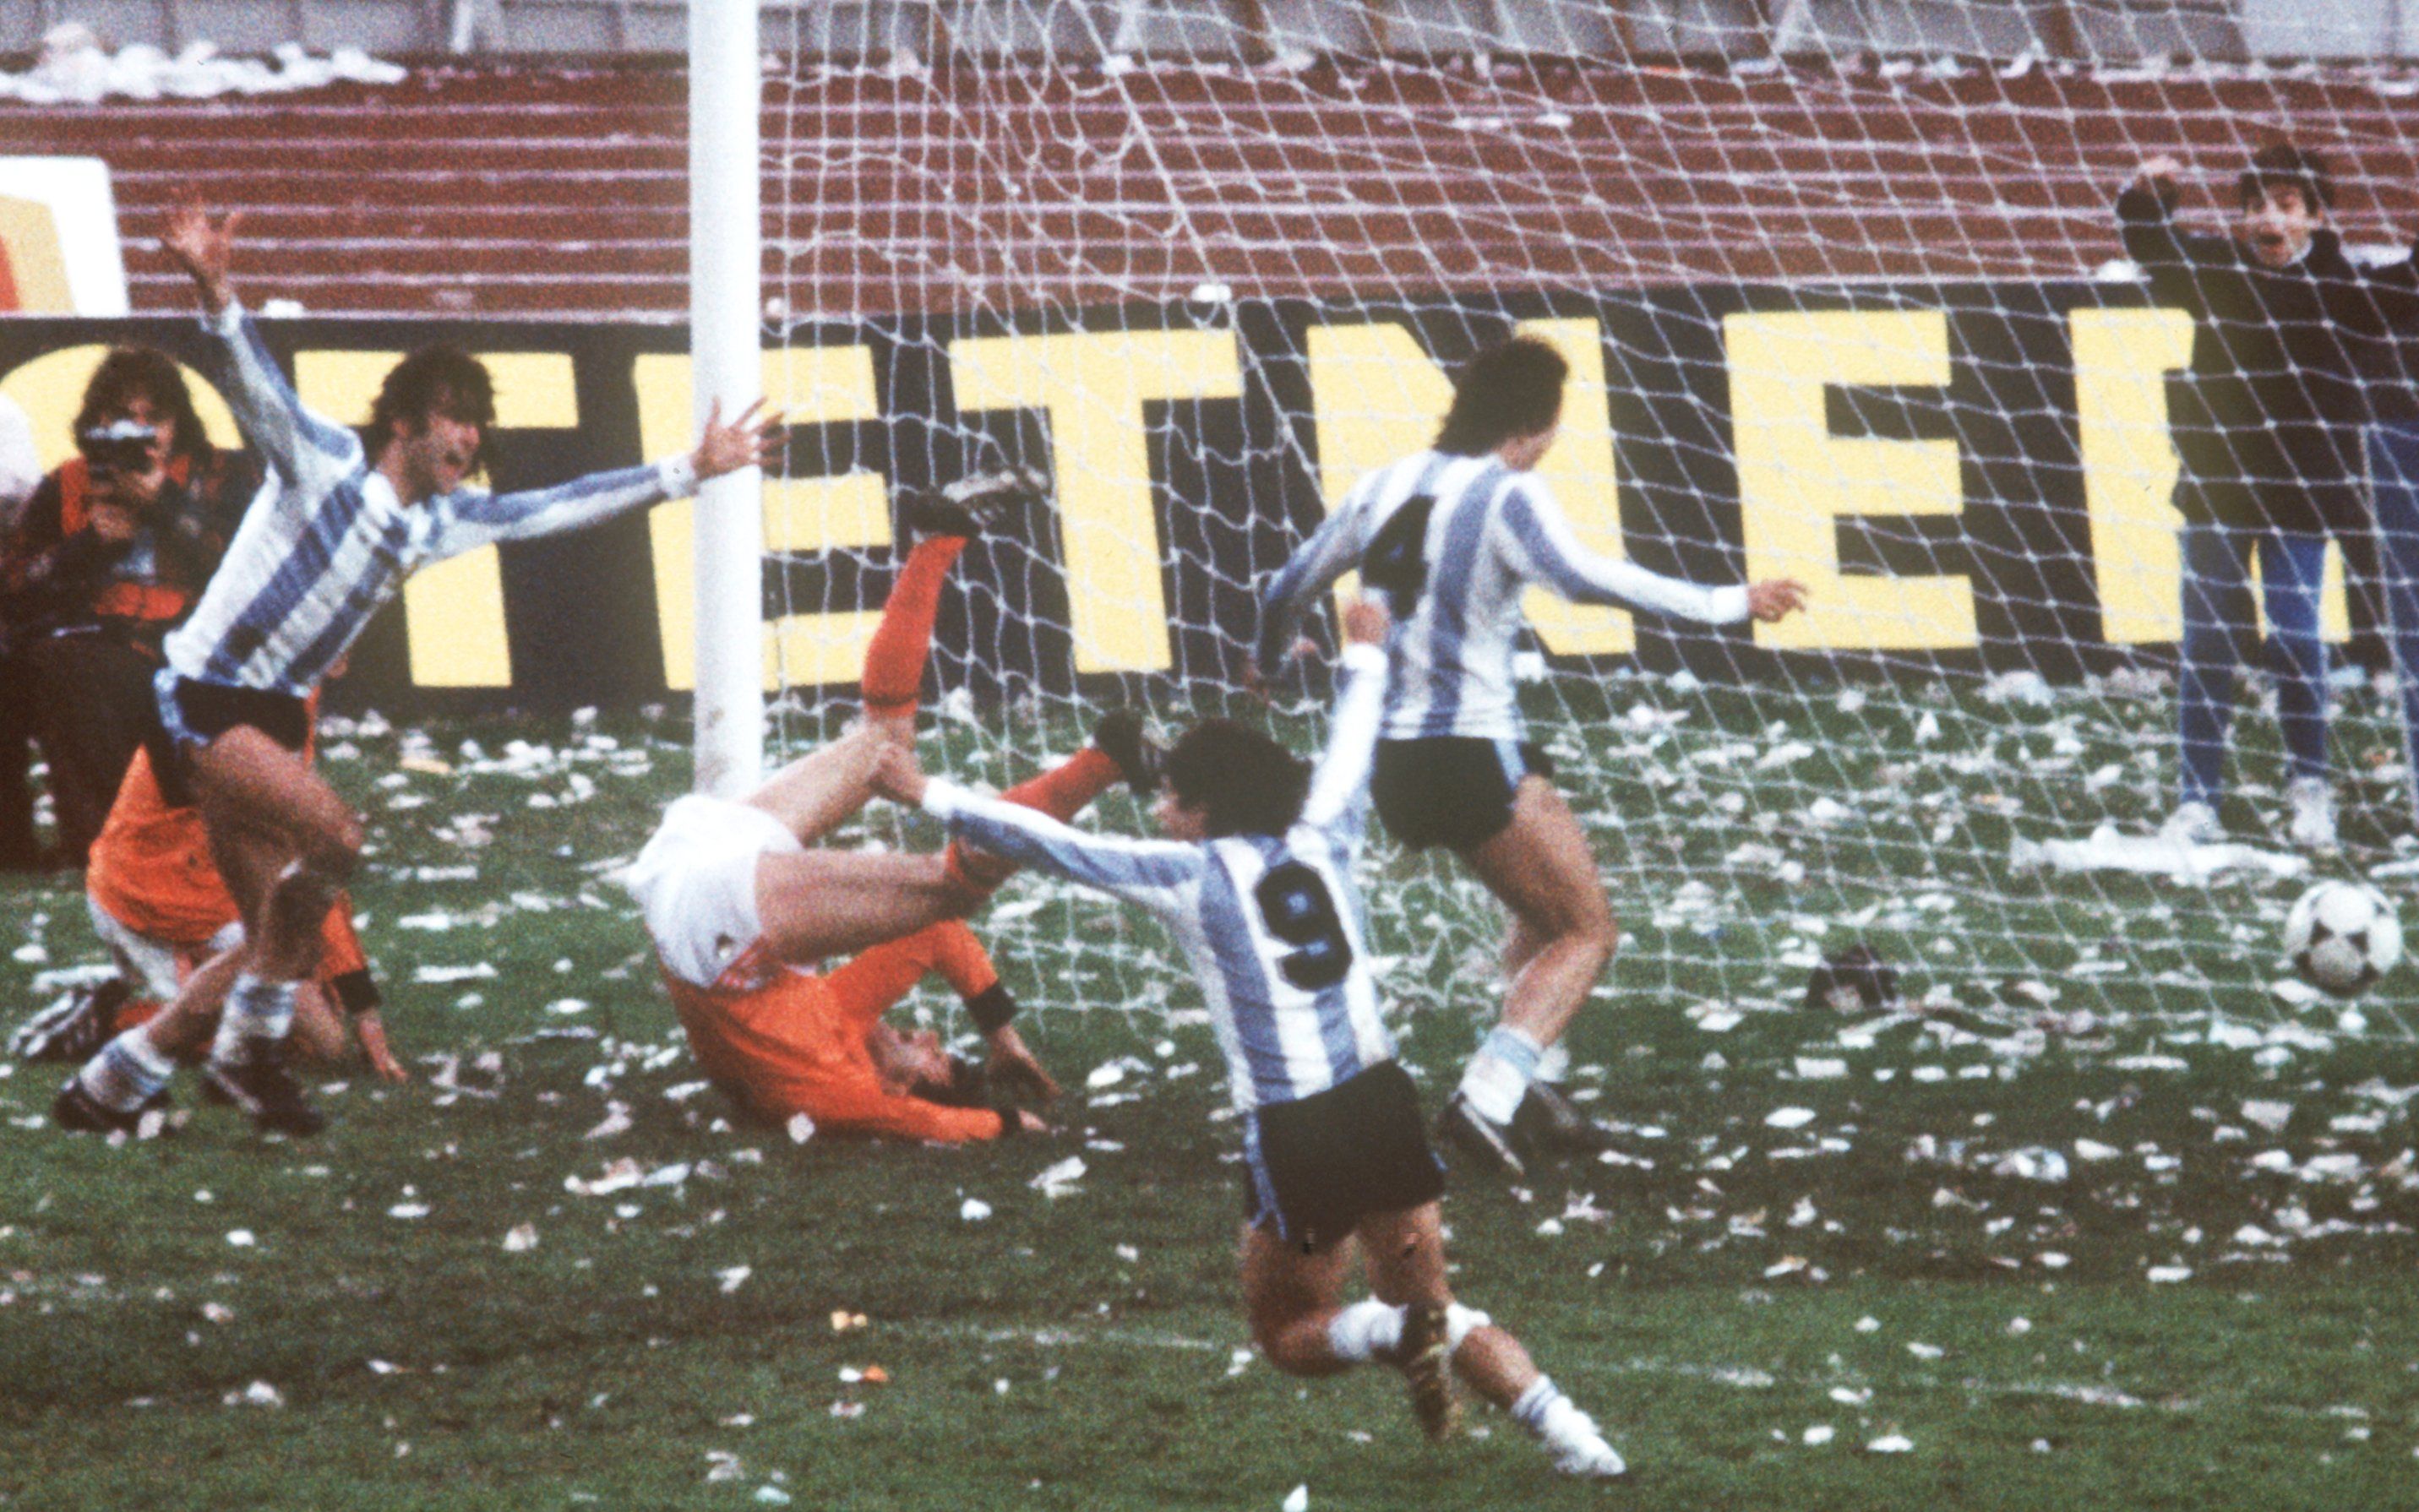 The Argentinian national team wins the World Cup final against the Netherlands, in Buenos Aires, Argentina on June 25, 1978.